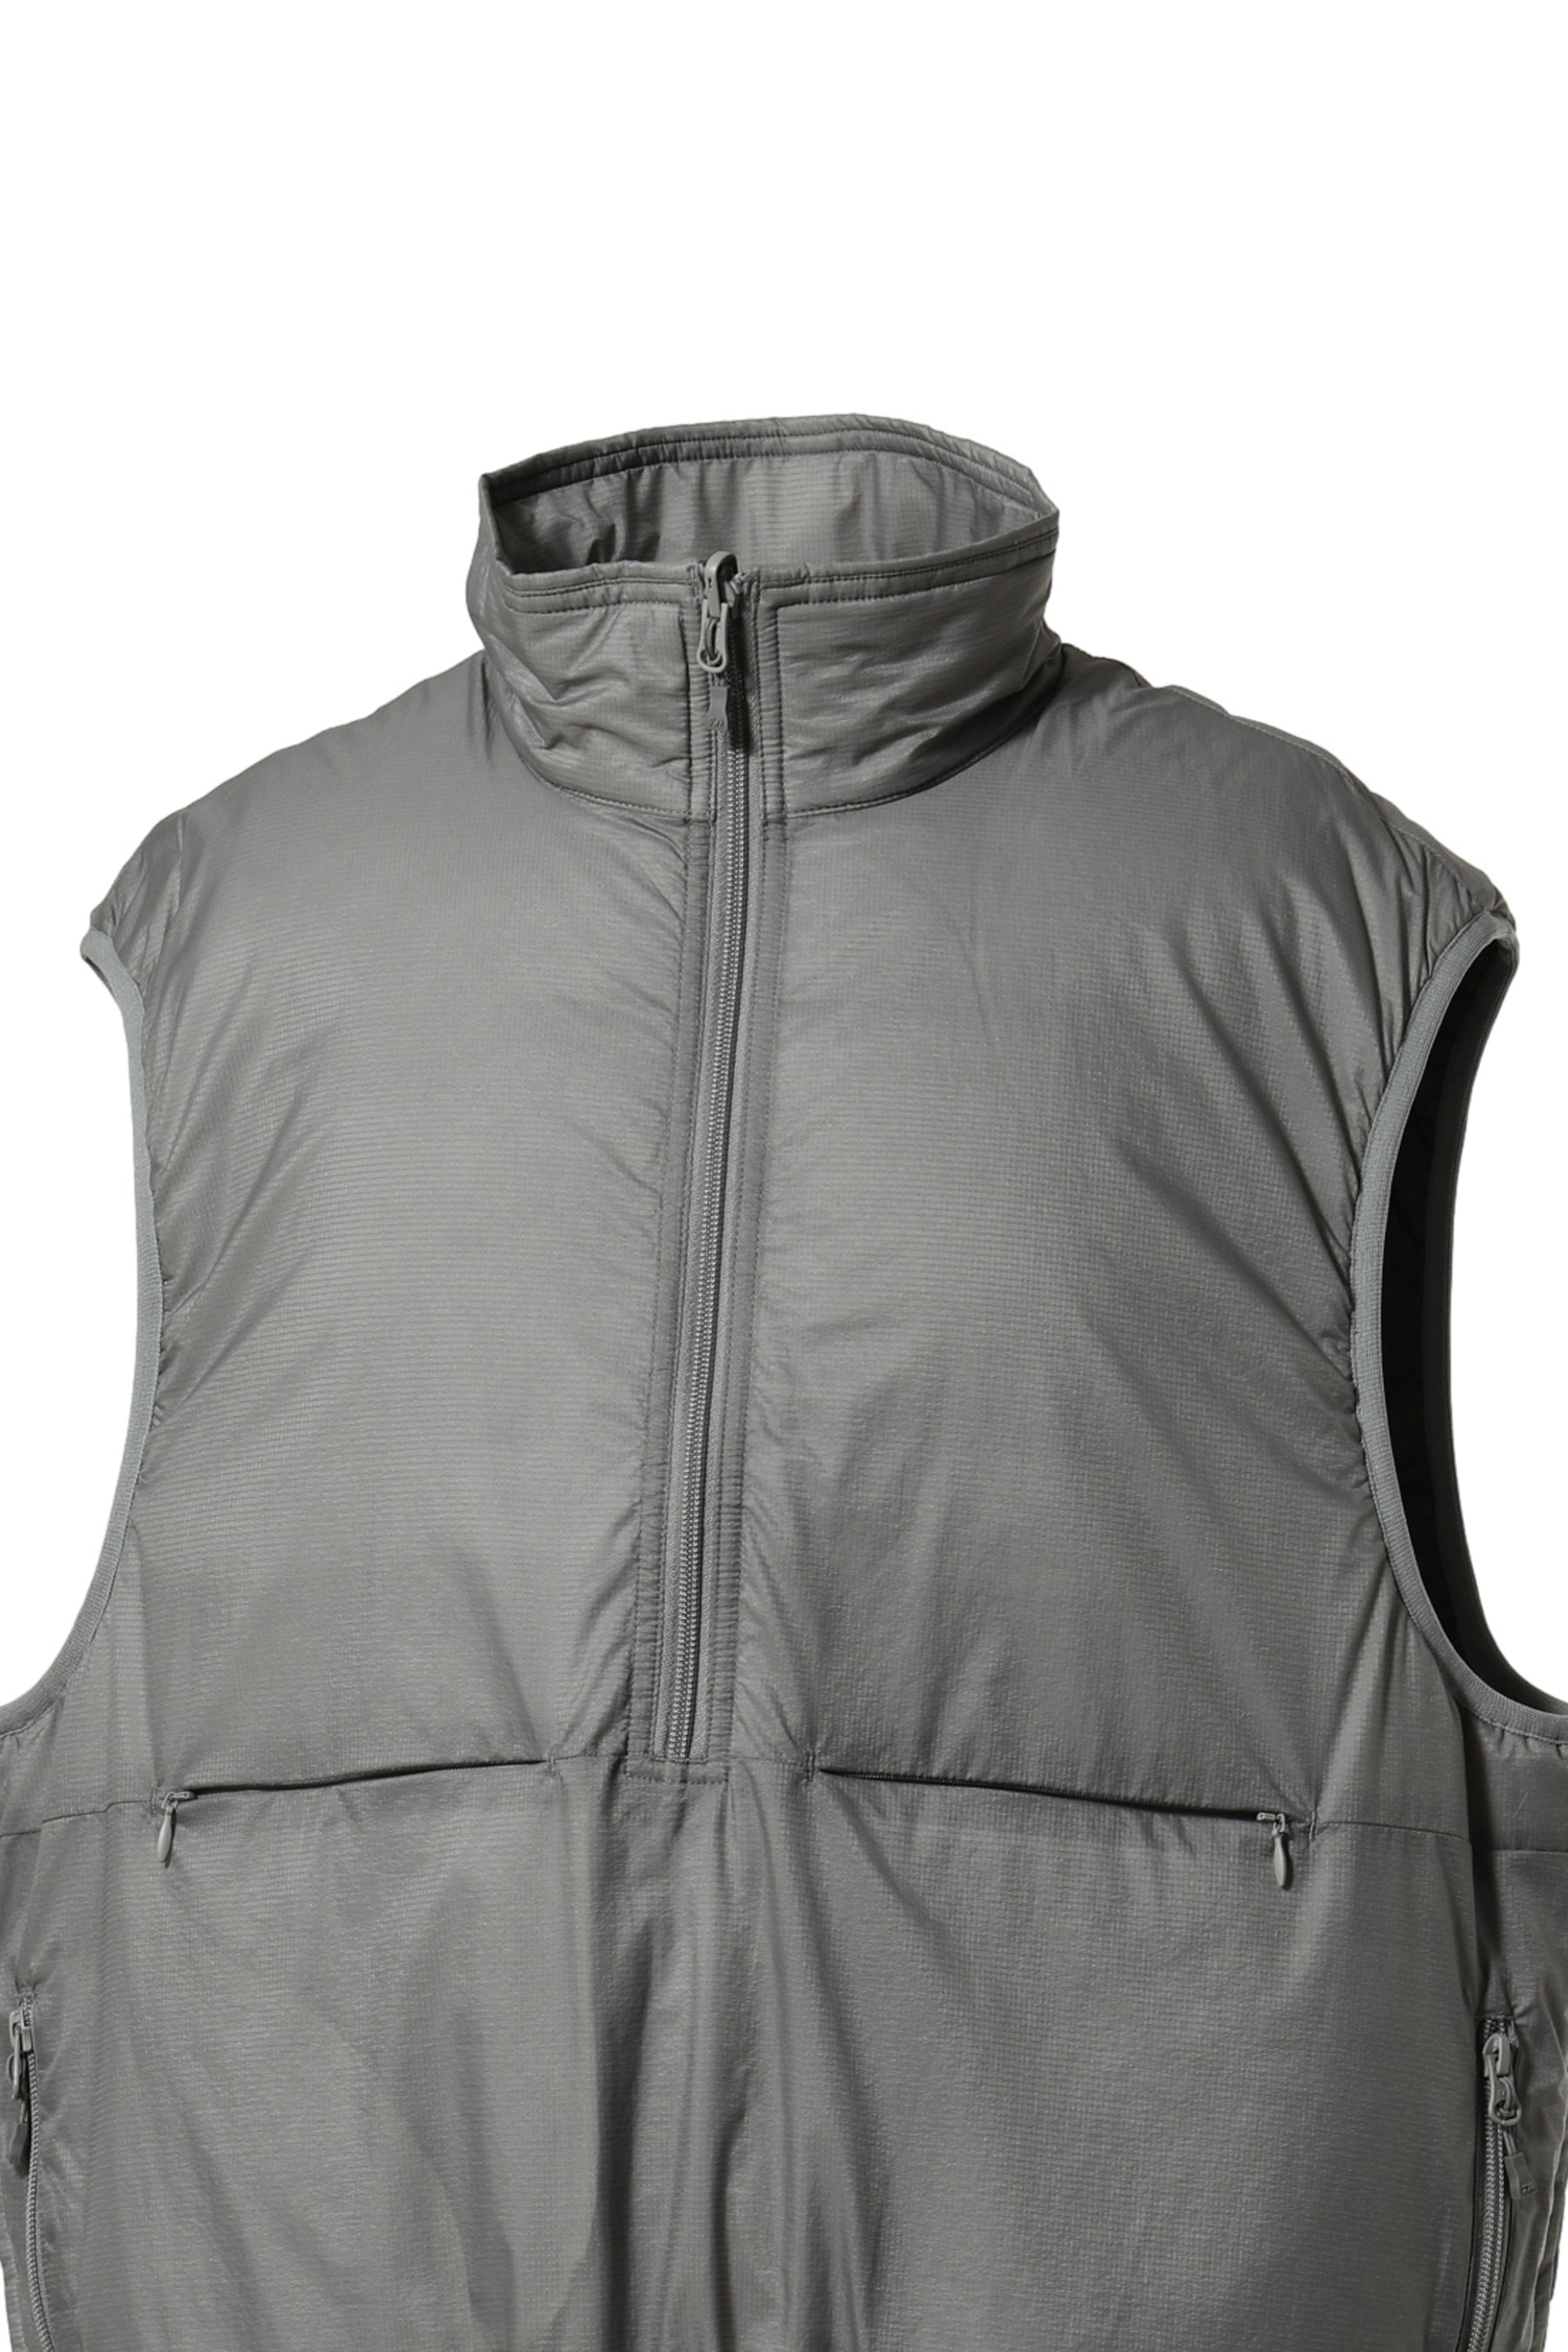 TECH REVERSIBLE PULLOVER PUFF VEST / GRY